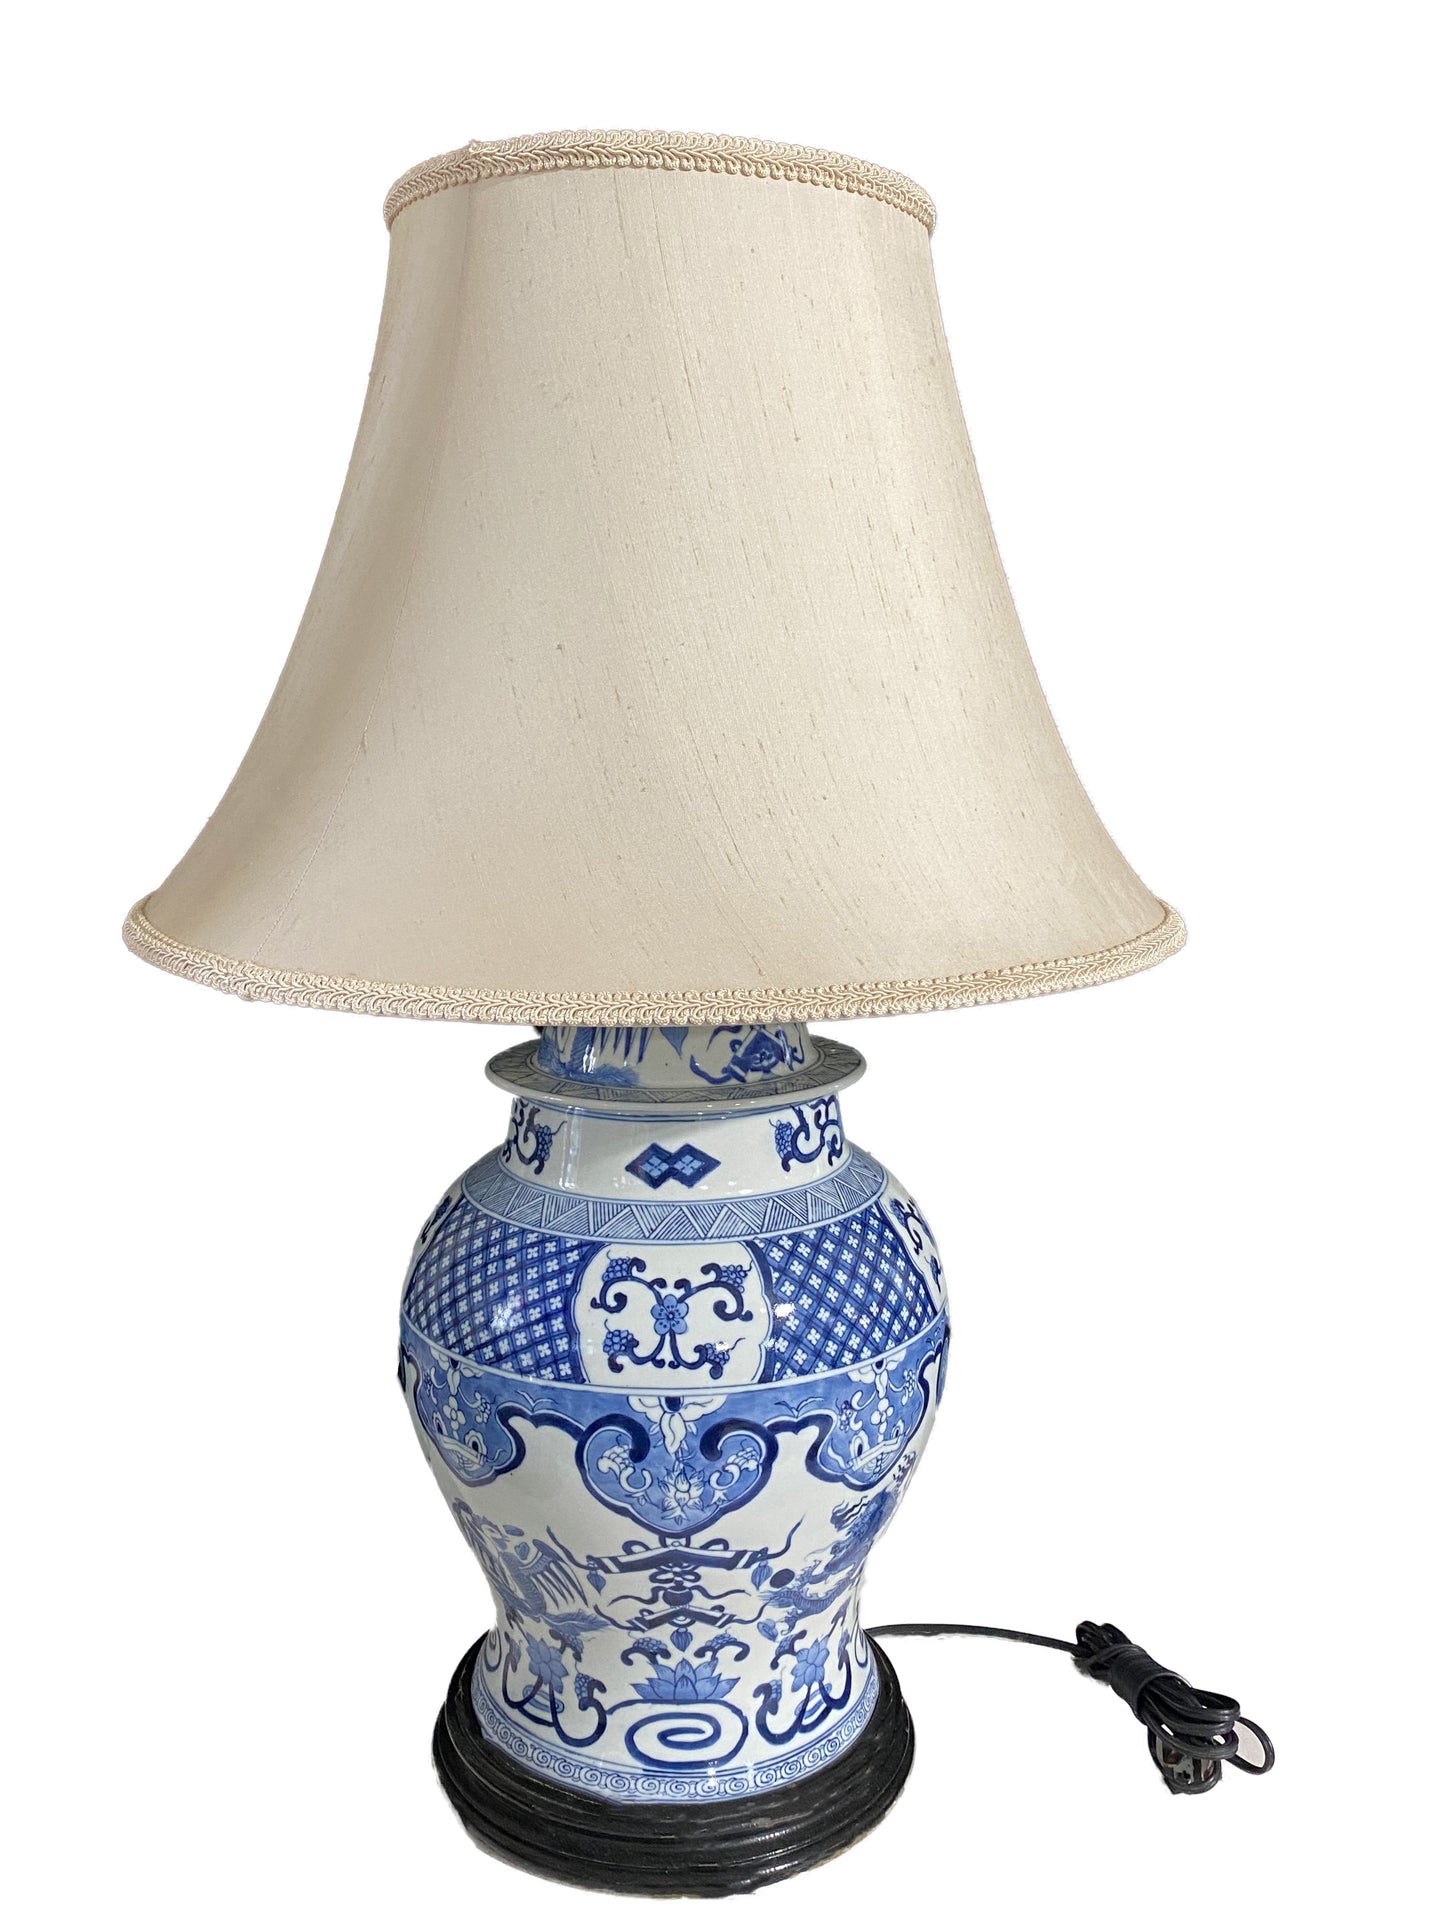 #4122 Chinoiserie Blue and White Ceramic Ginger Jar / Table Lamp